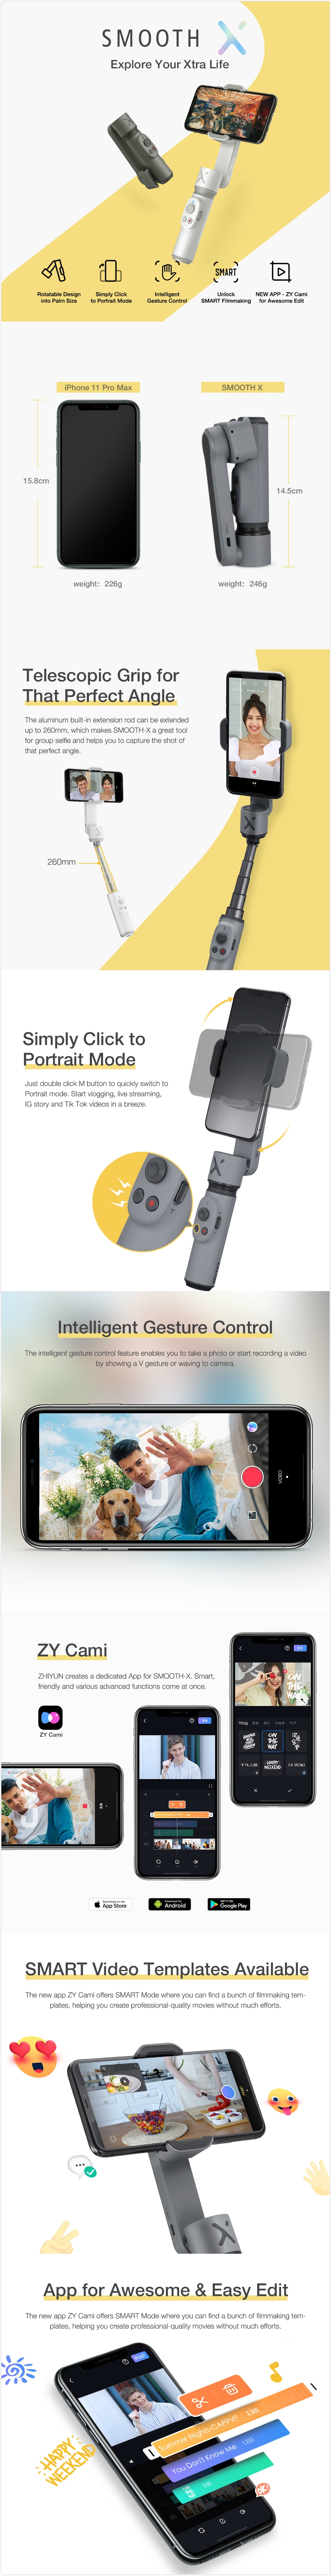 ZHIYUN SMOOTH X Handheld Gimbal Extension Rod Stick Stabilizer Portable Palm Size for iPhone Huawei Xiaomi Redmi Vlog Video Selfie